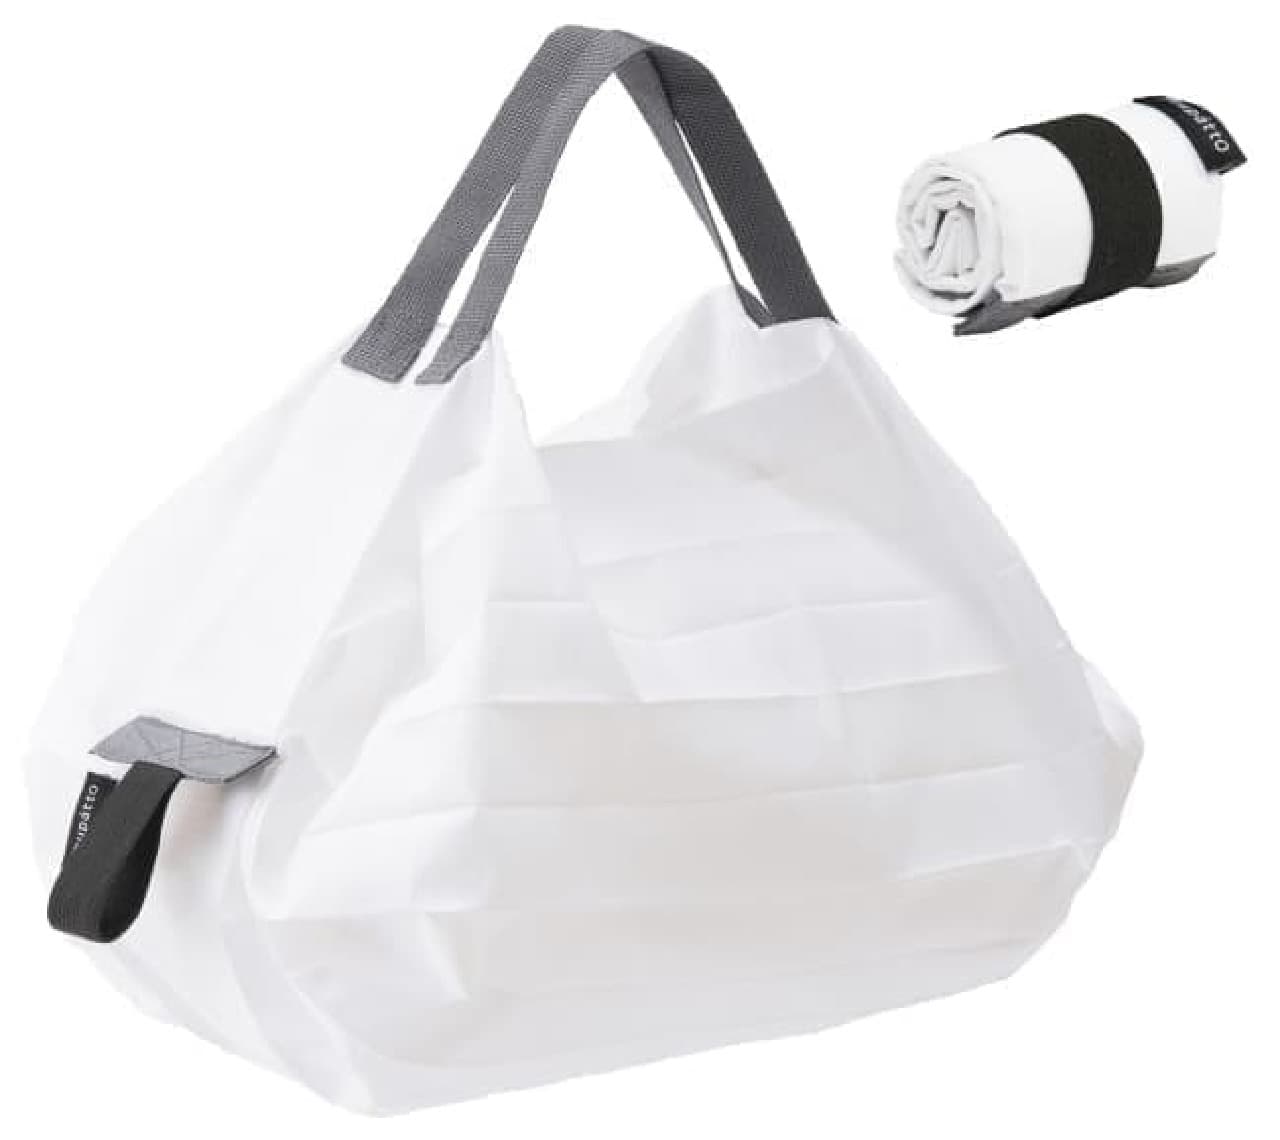 Eco bag Shupatto, which is popular for its portability